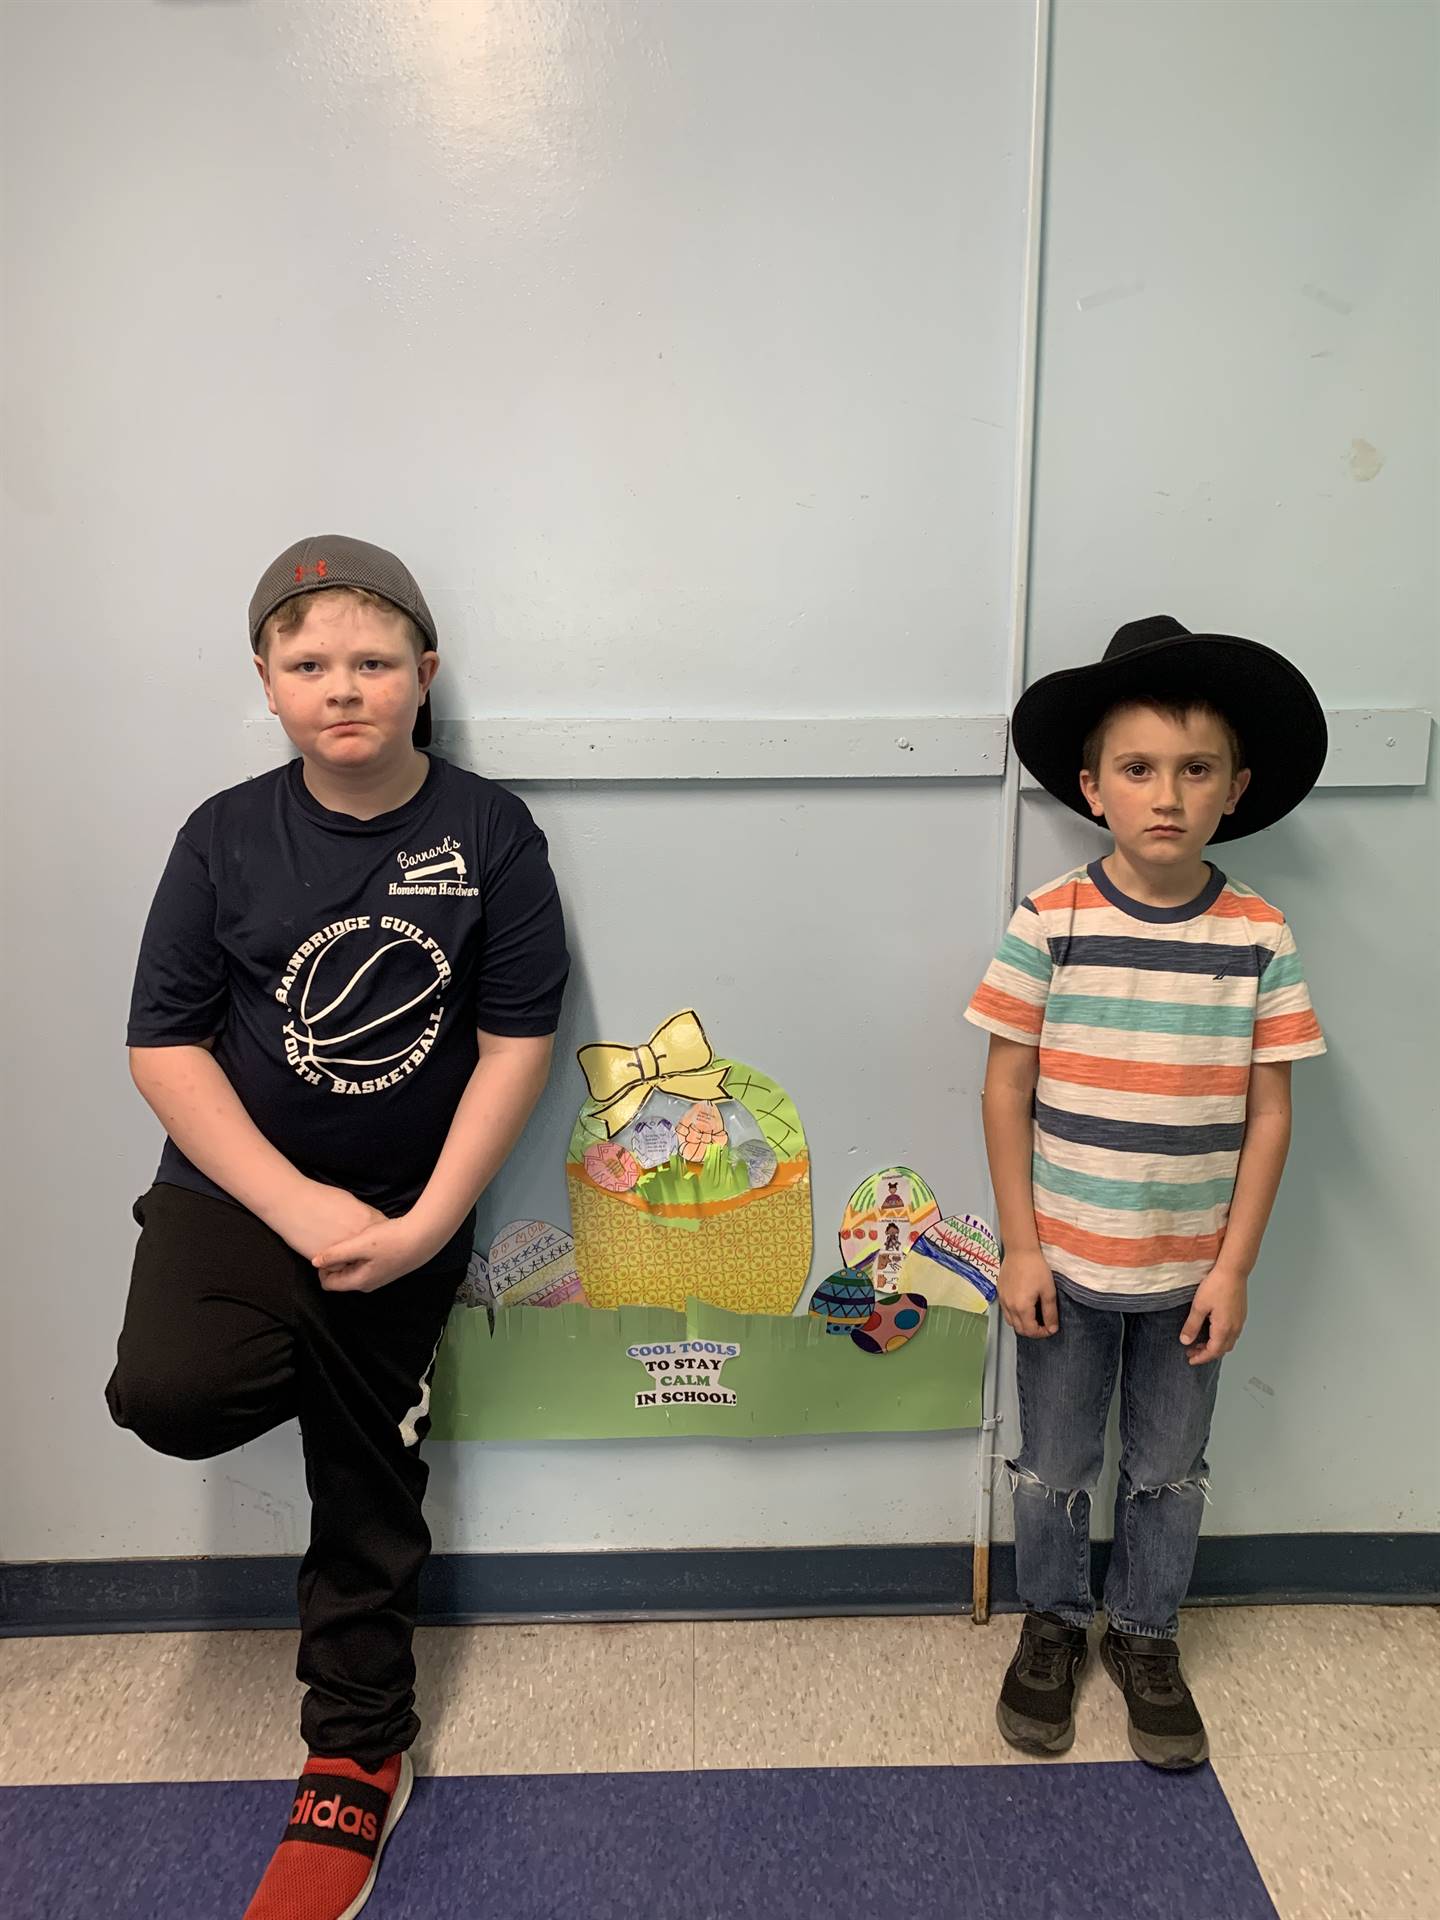 2 students against wall. 1 with wide brim hat and other with baseball cap.